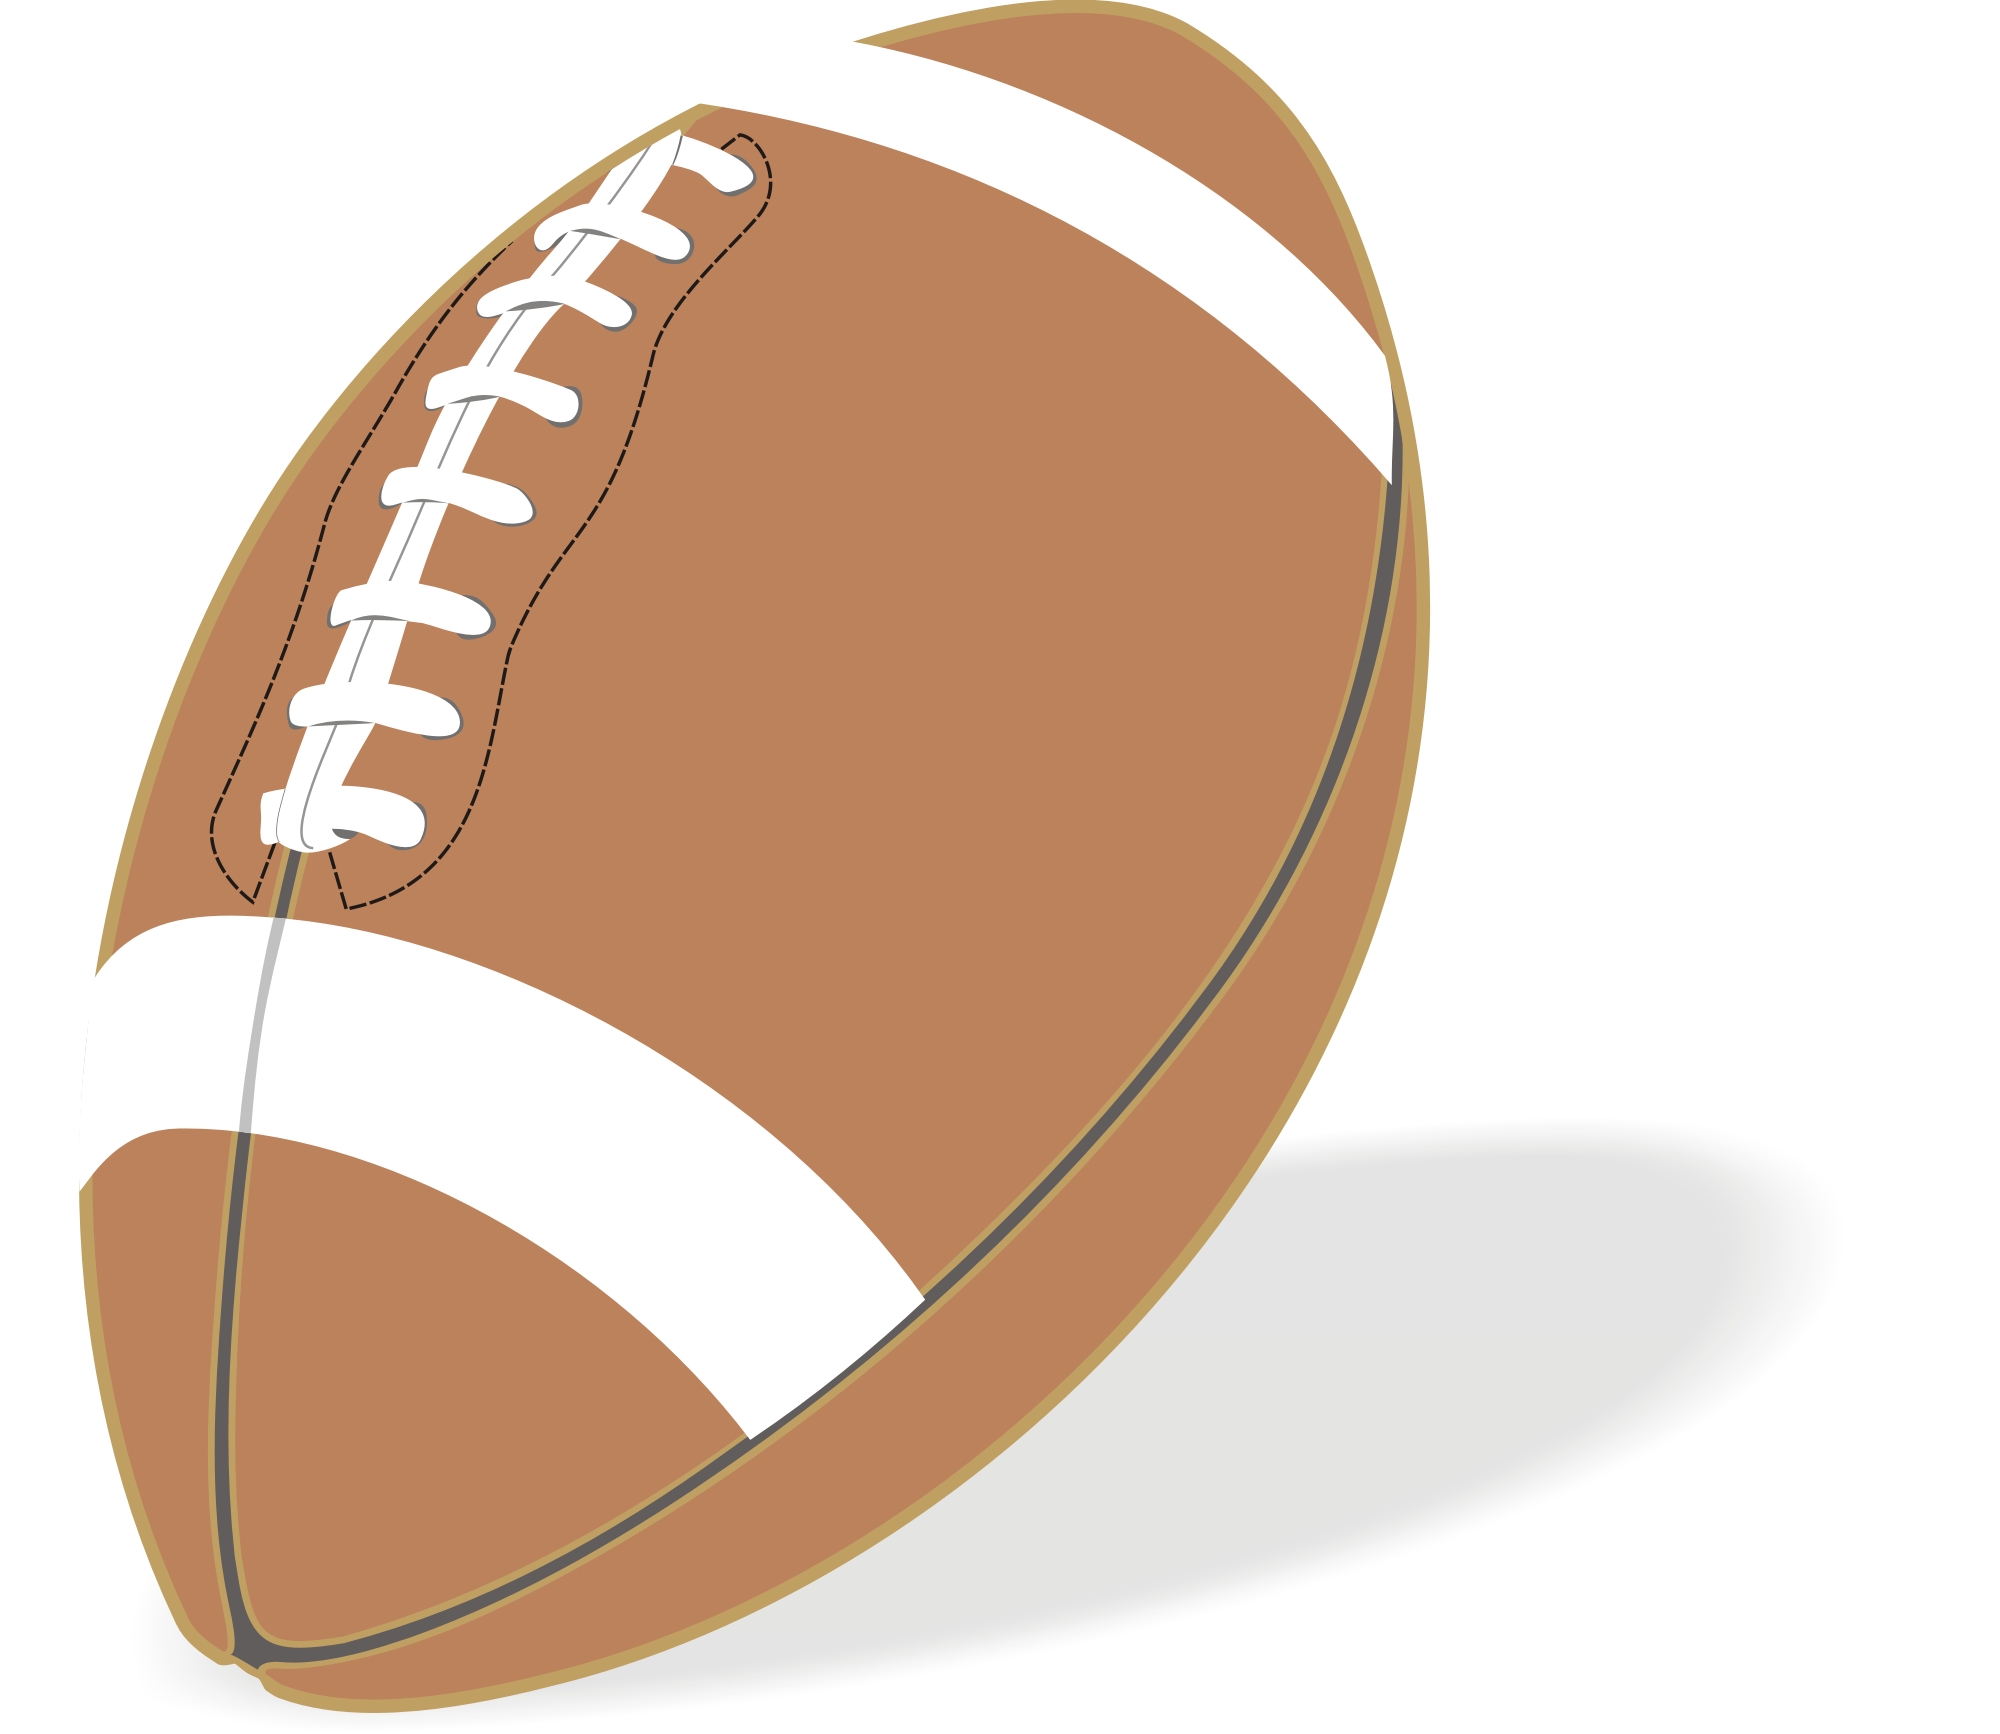 Clip art sports image. Football clipart sign